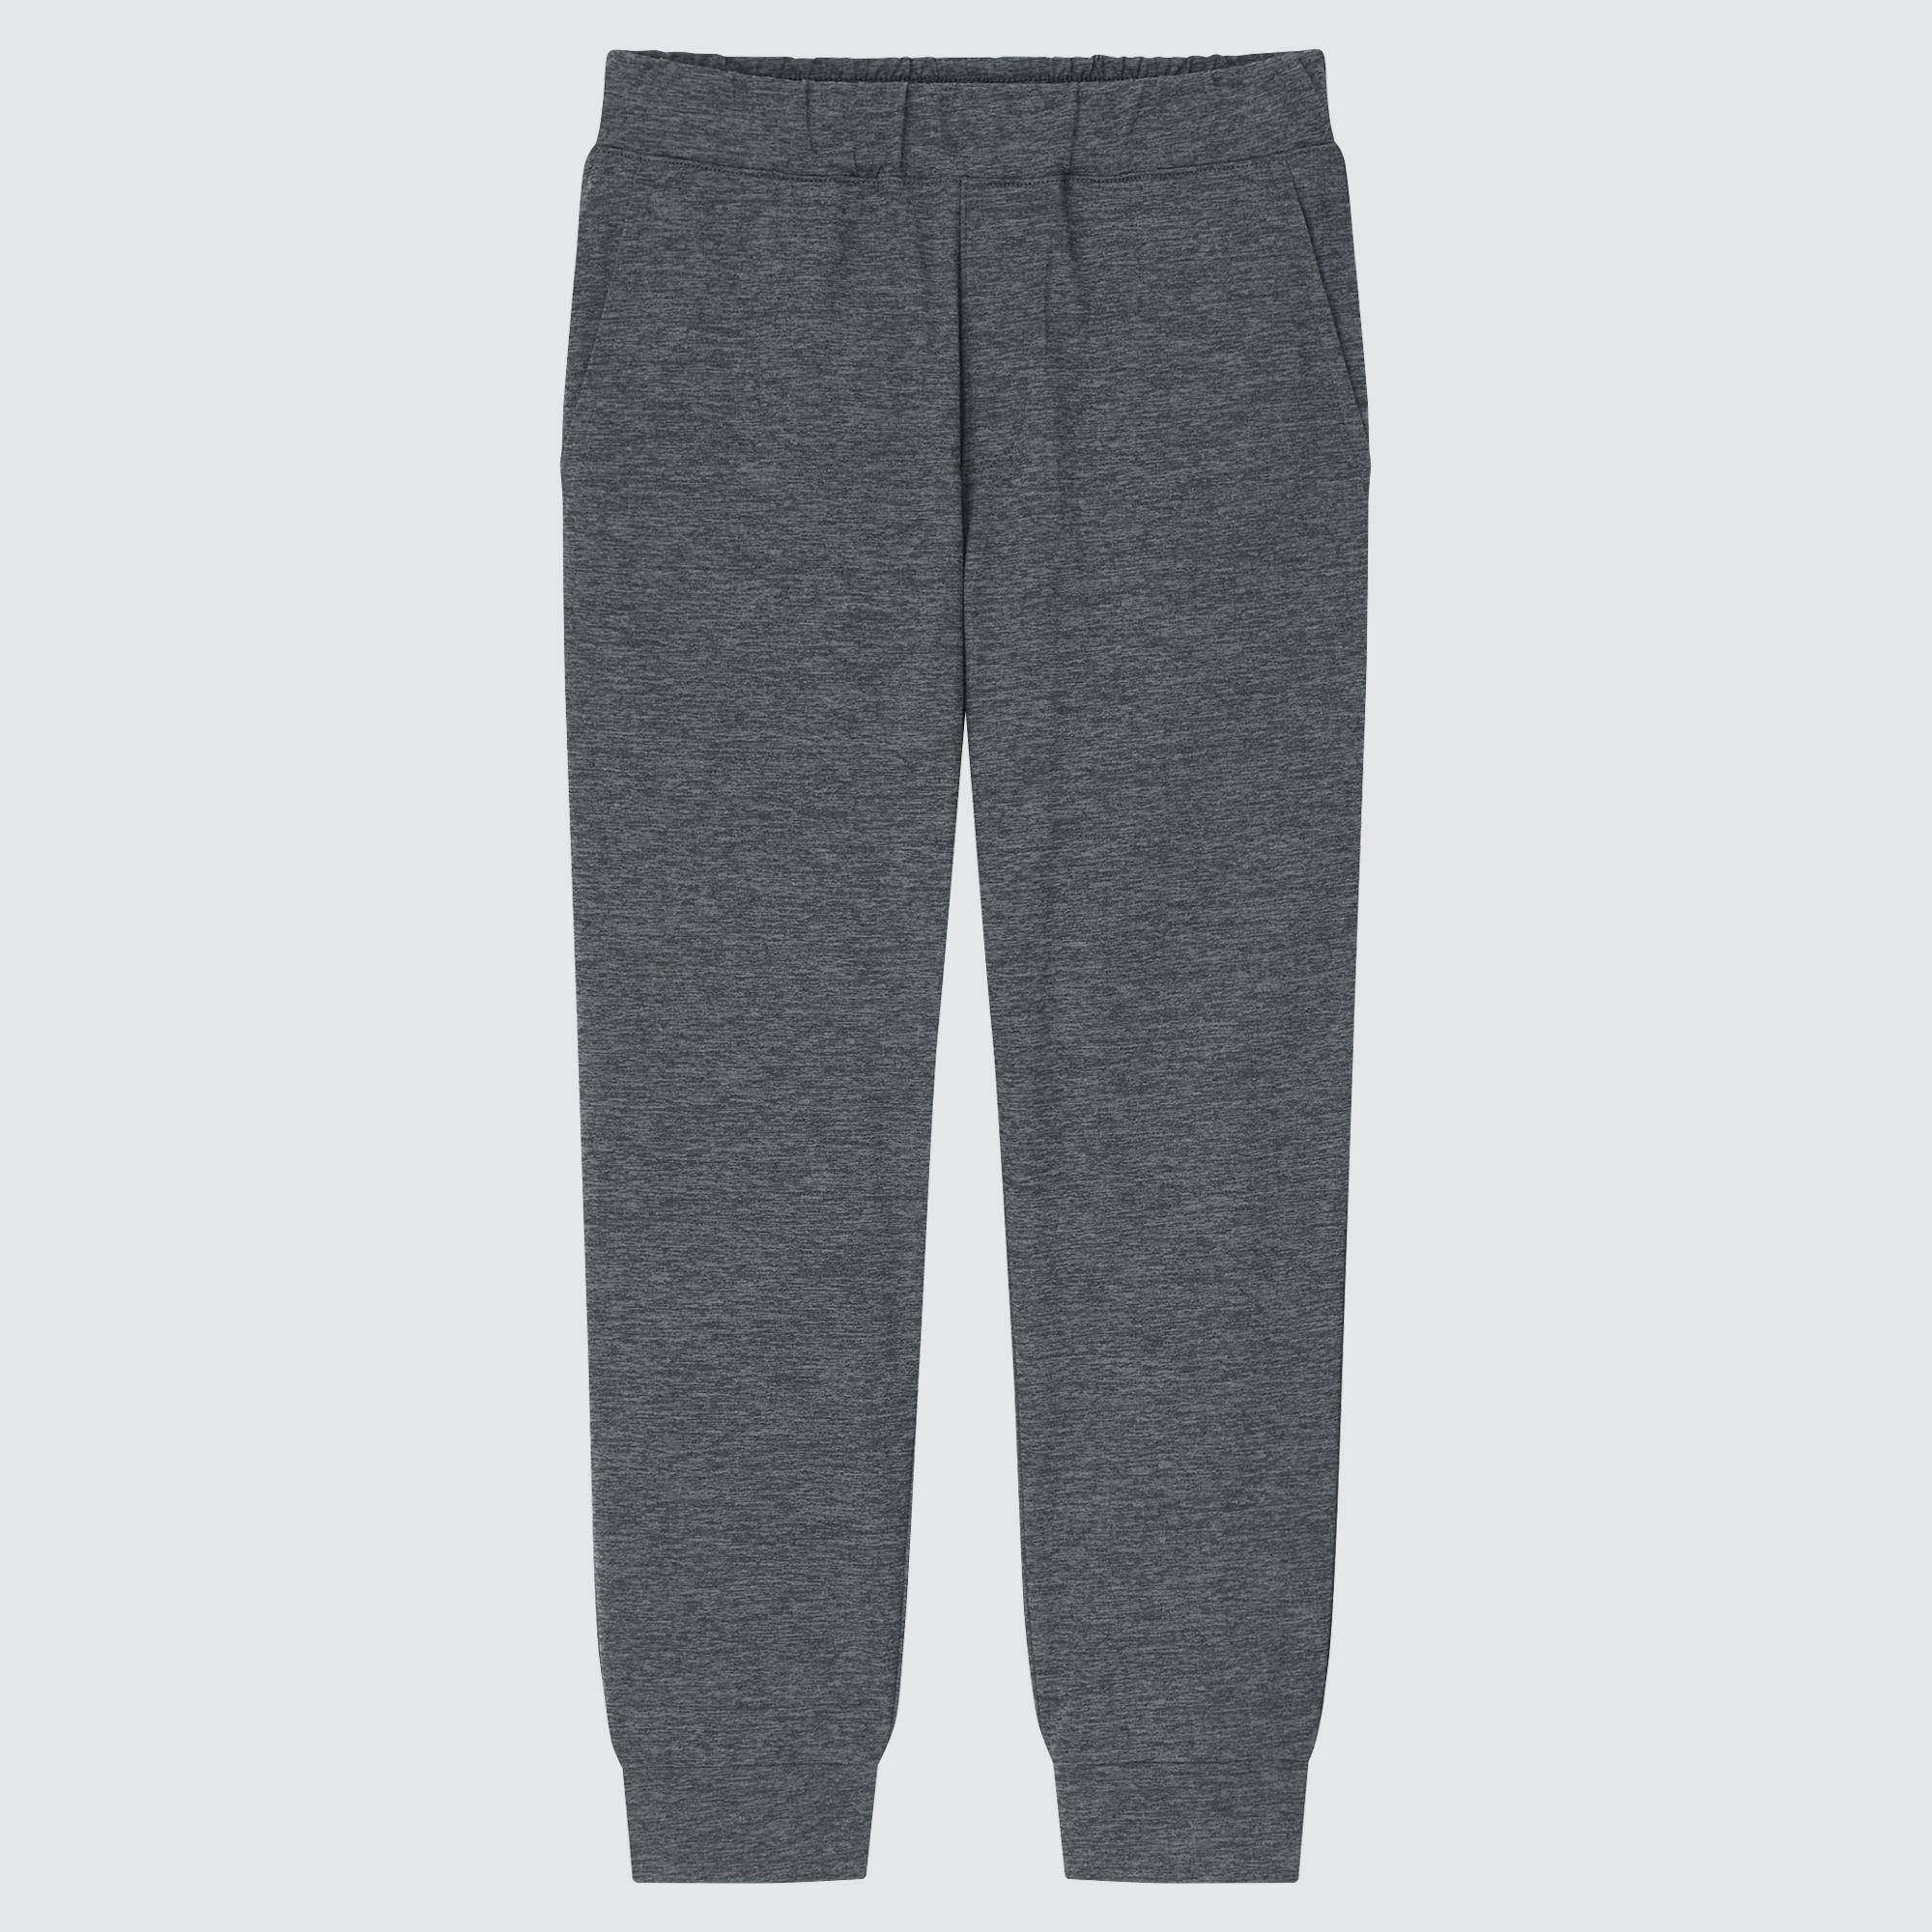 UNIQLO Ultra Stretch Active Jogger Pants | StyleHint